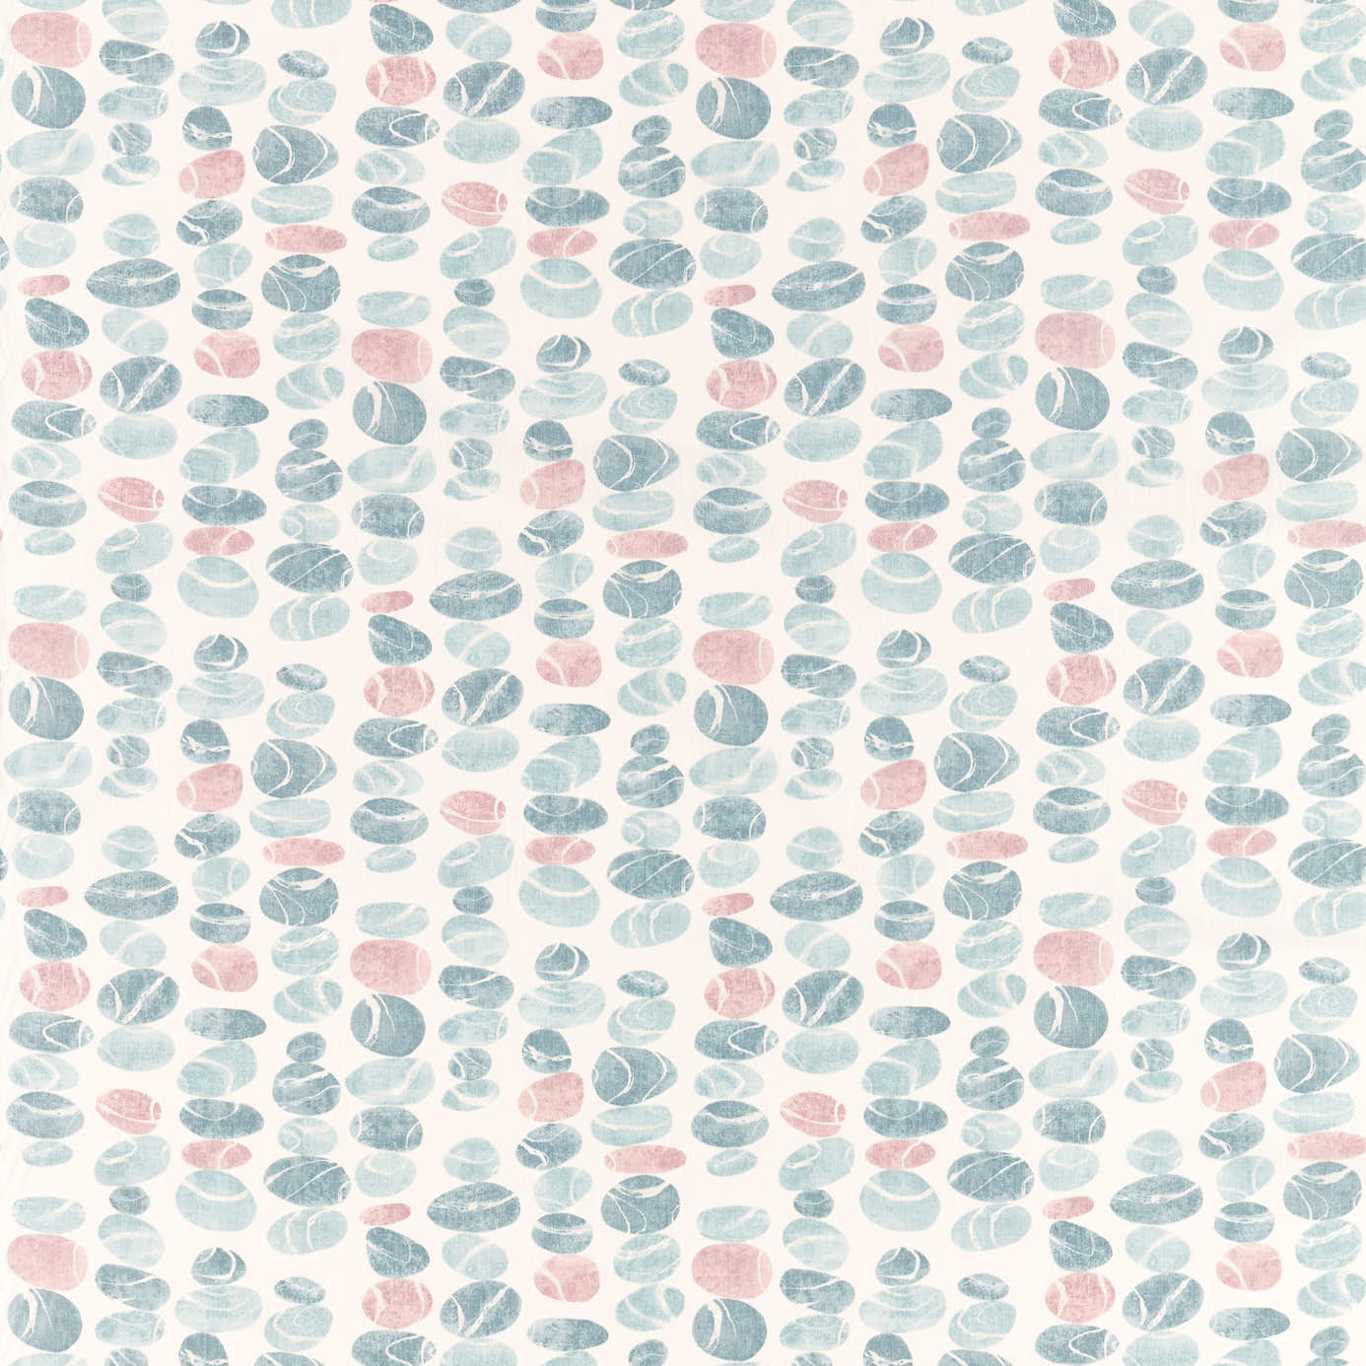 Stacking Pebbles Sky/Blush Fabric by SAN